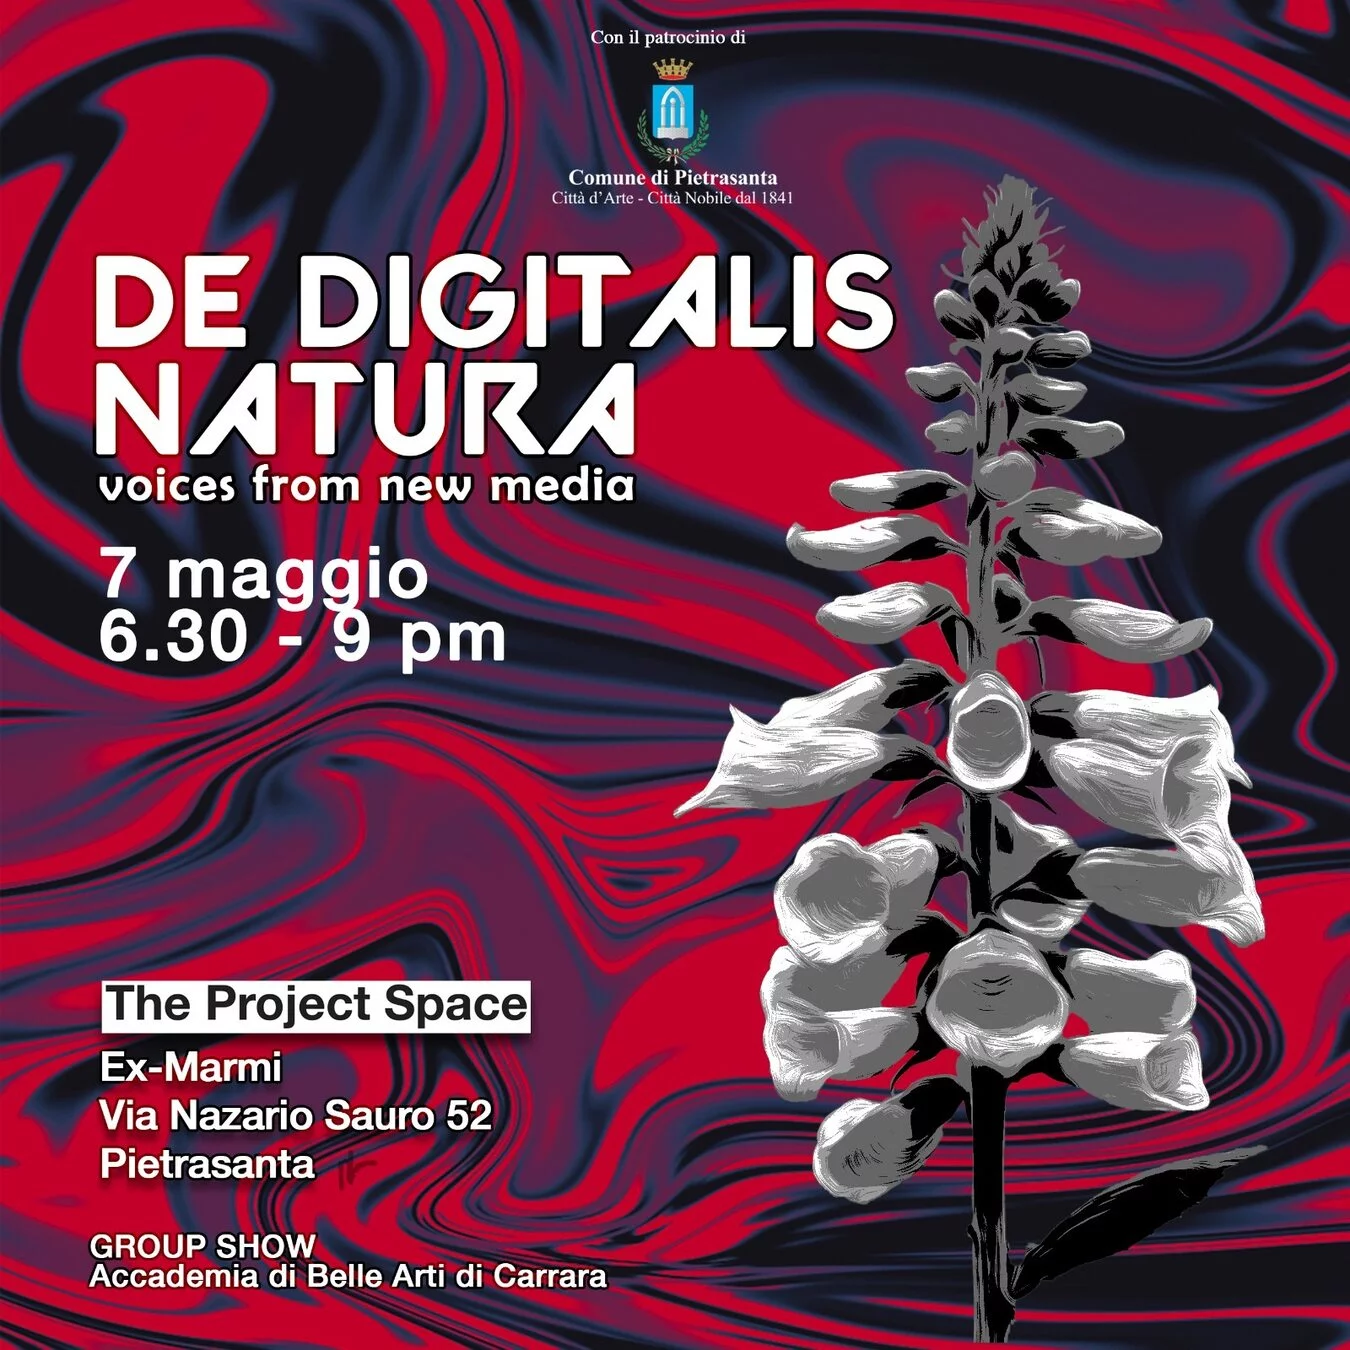 The Digitalis Natura. Voices from new media